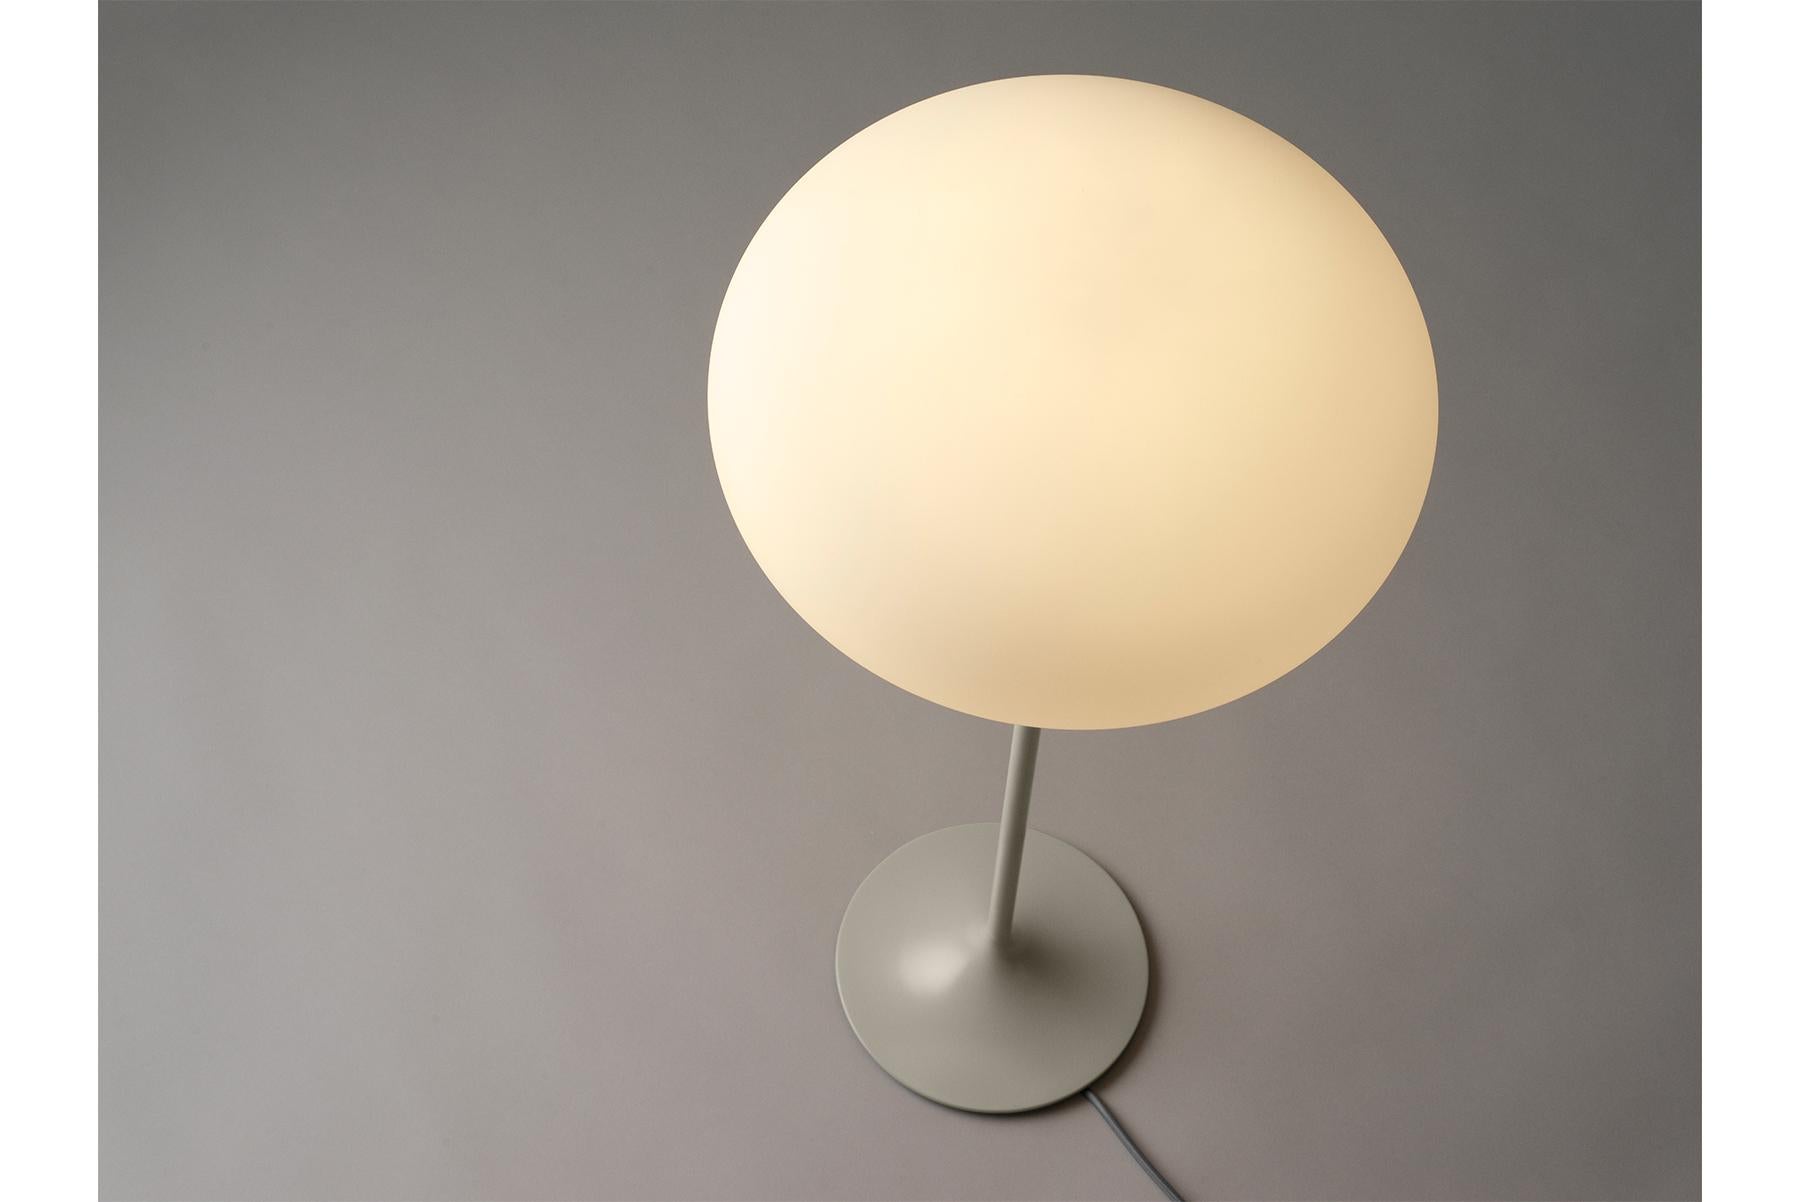 Stemlite Table Lamp, Frosted Glass, Pebble Grey In New Condition For Sale In Berkeley, CA